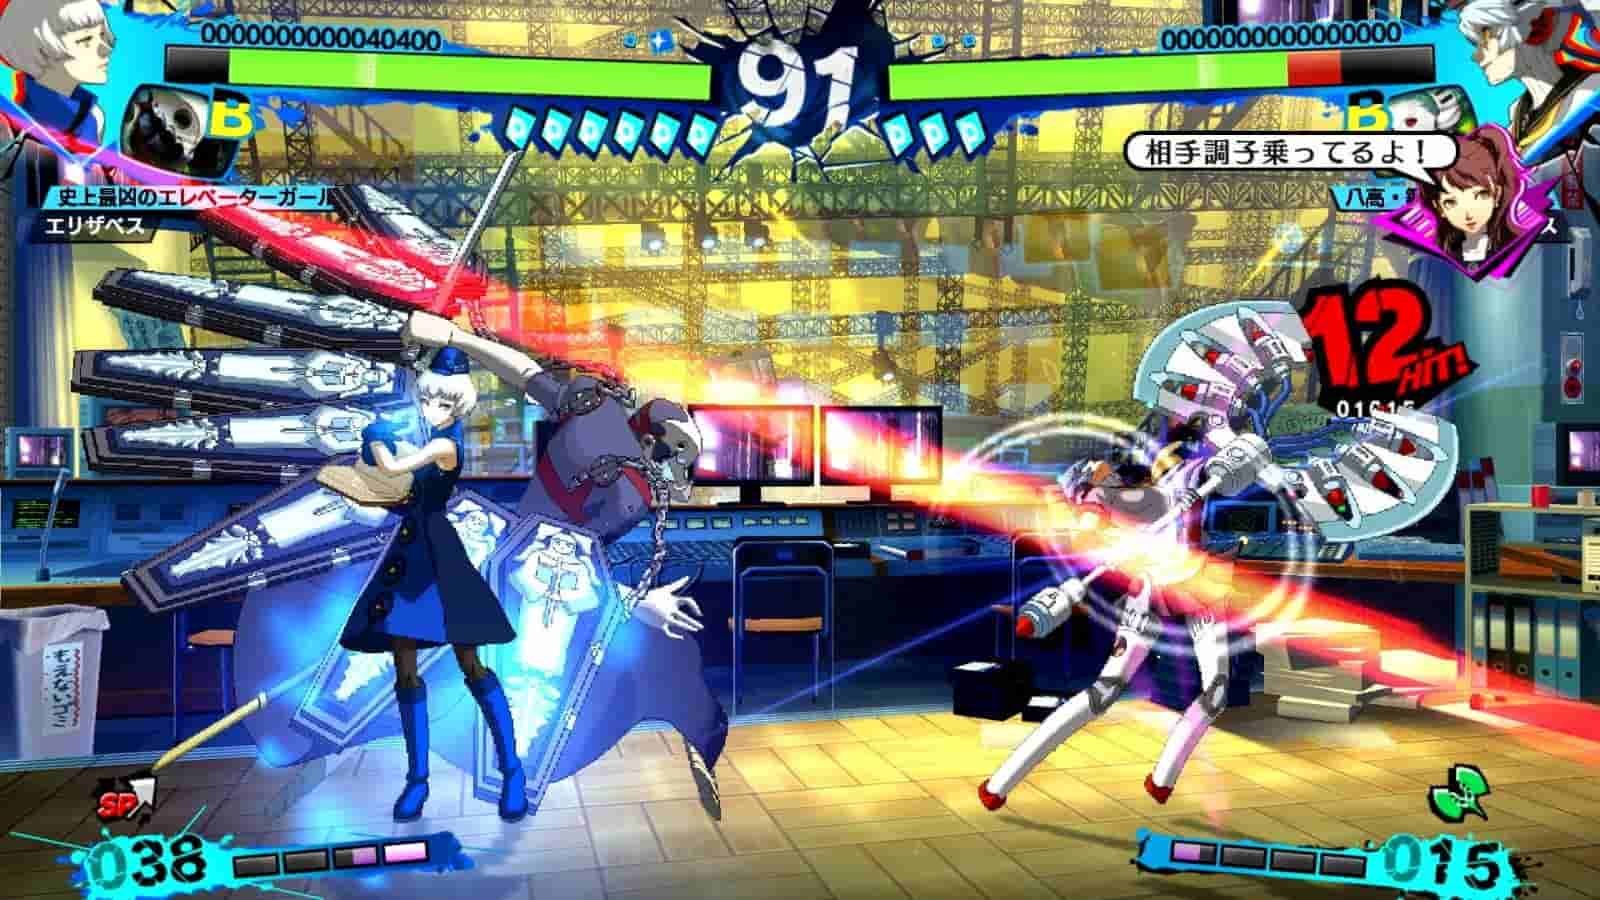 Persona 4: Arena Ultimax, P4U, Persona, Fighting, PlayStation 4, PS4, PlayStation 4, Switch, Nintendo Switch, release date, trailer, screenshots, pre-order now, Japan